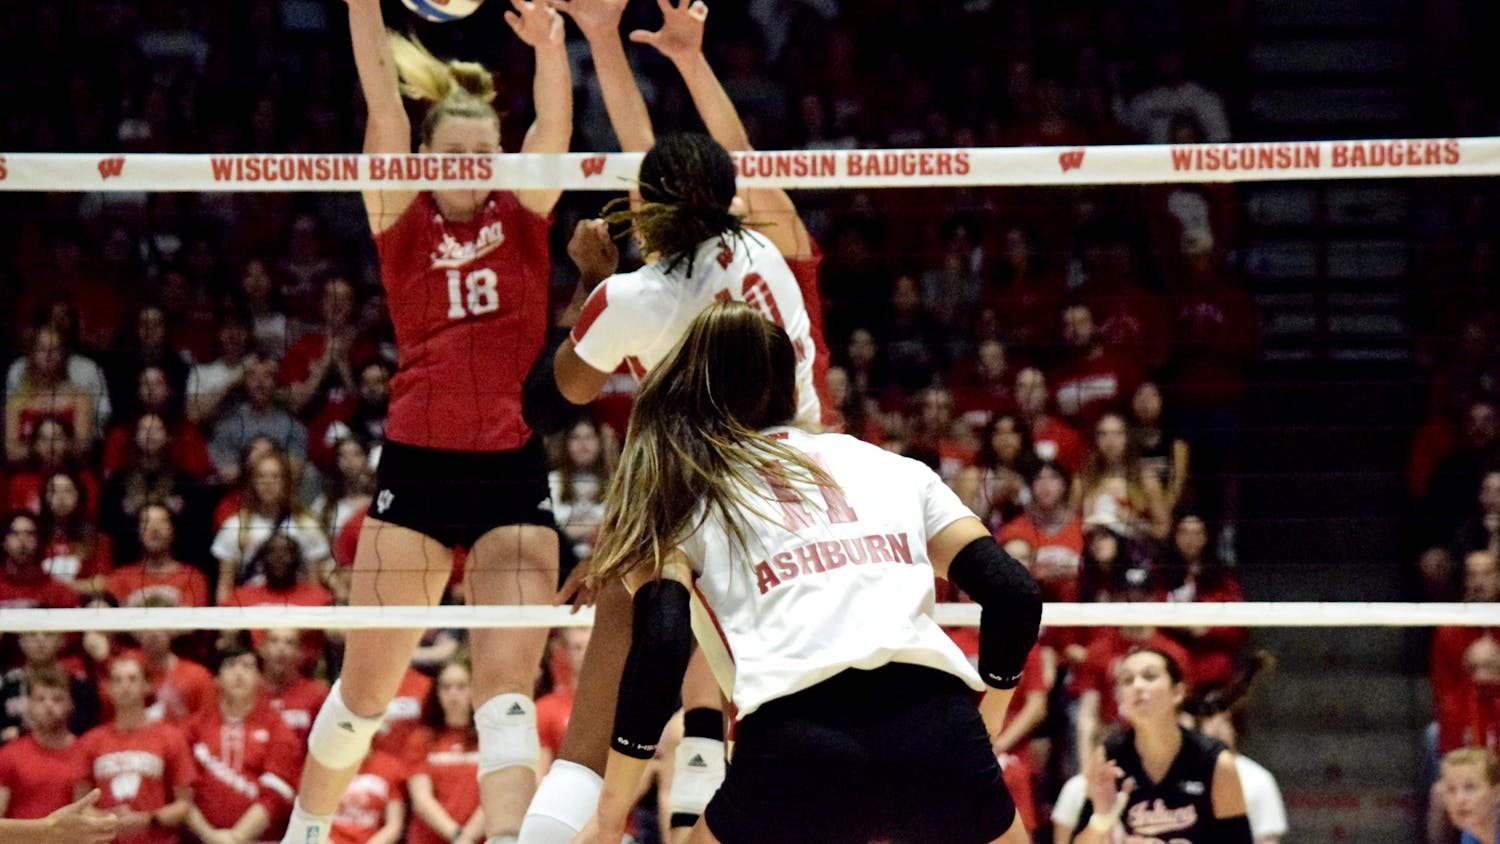 PHOTOS: Badgers Volleyball continue their winning streak after defeating Indiana 3-0